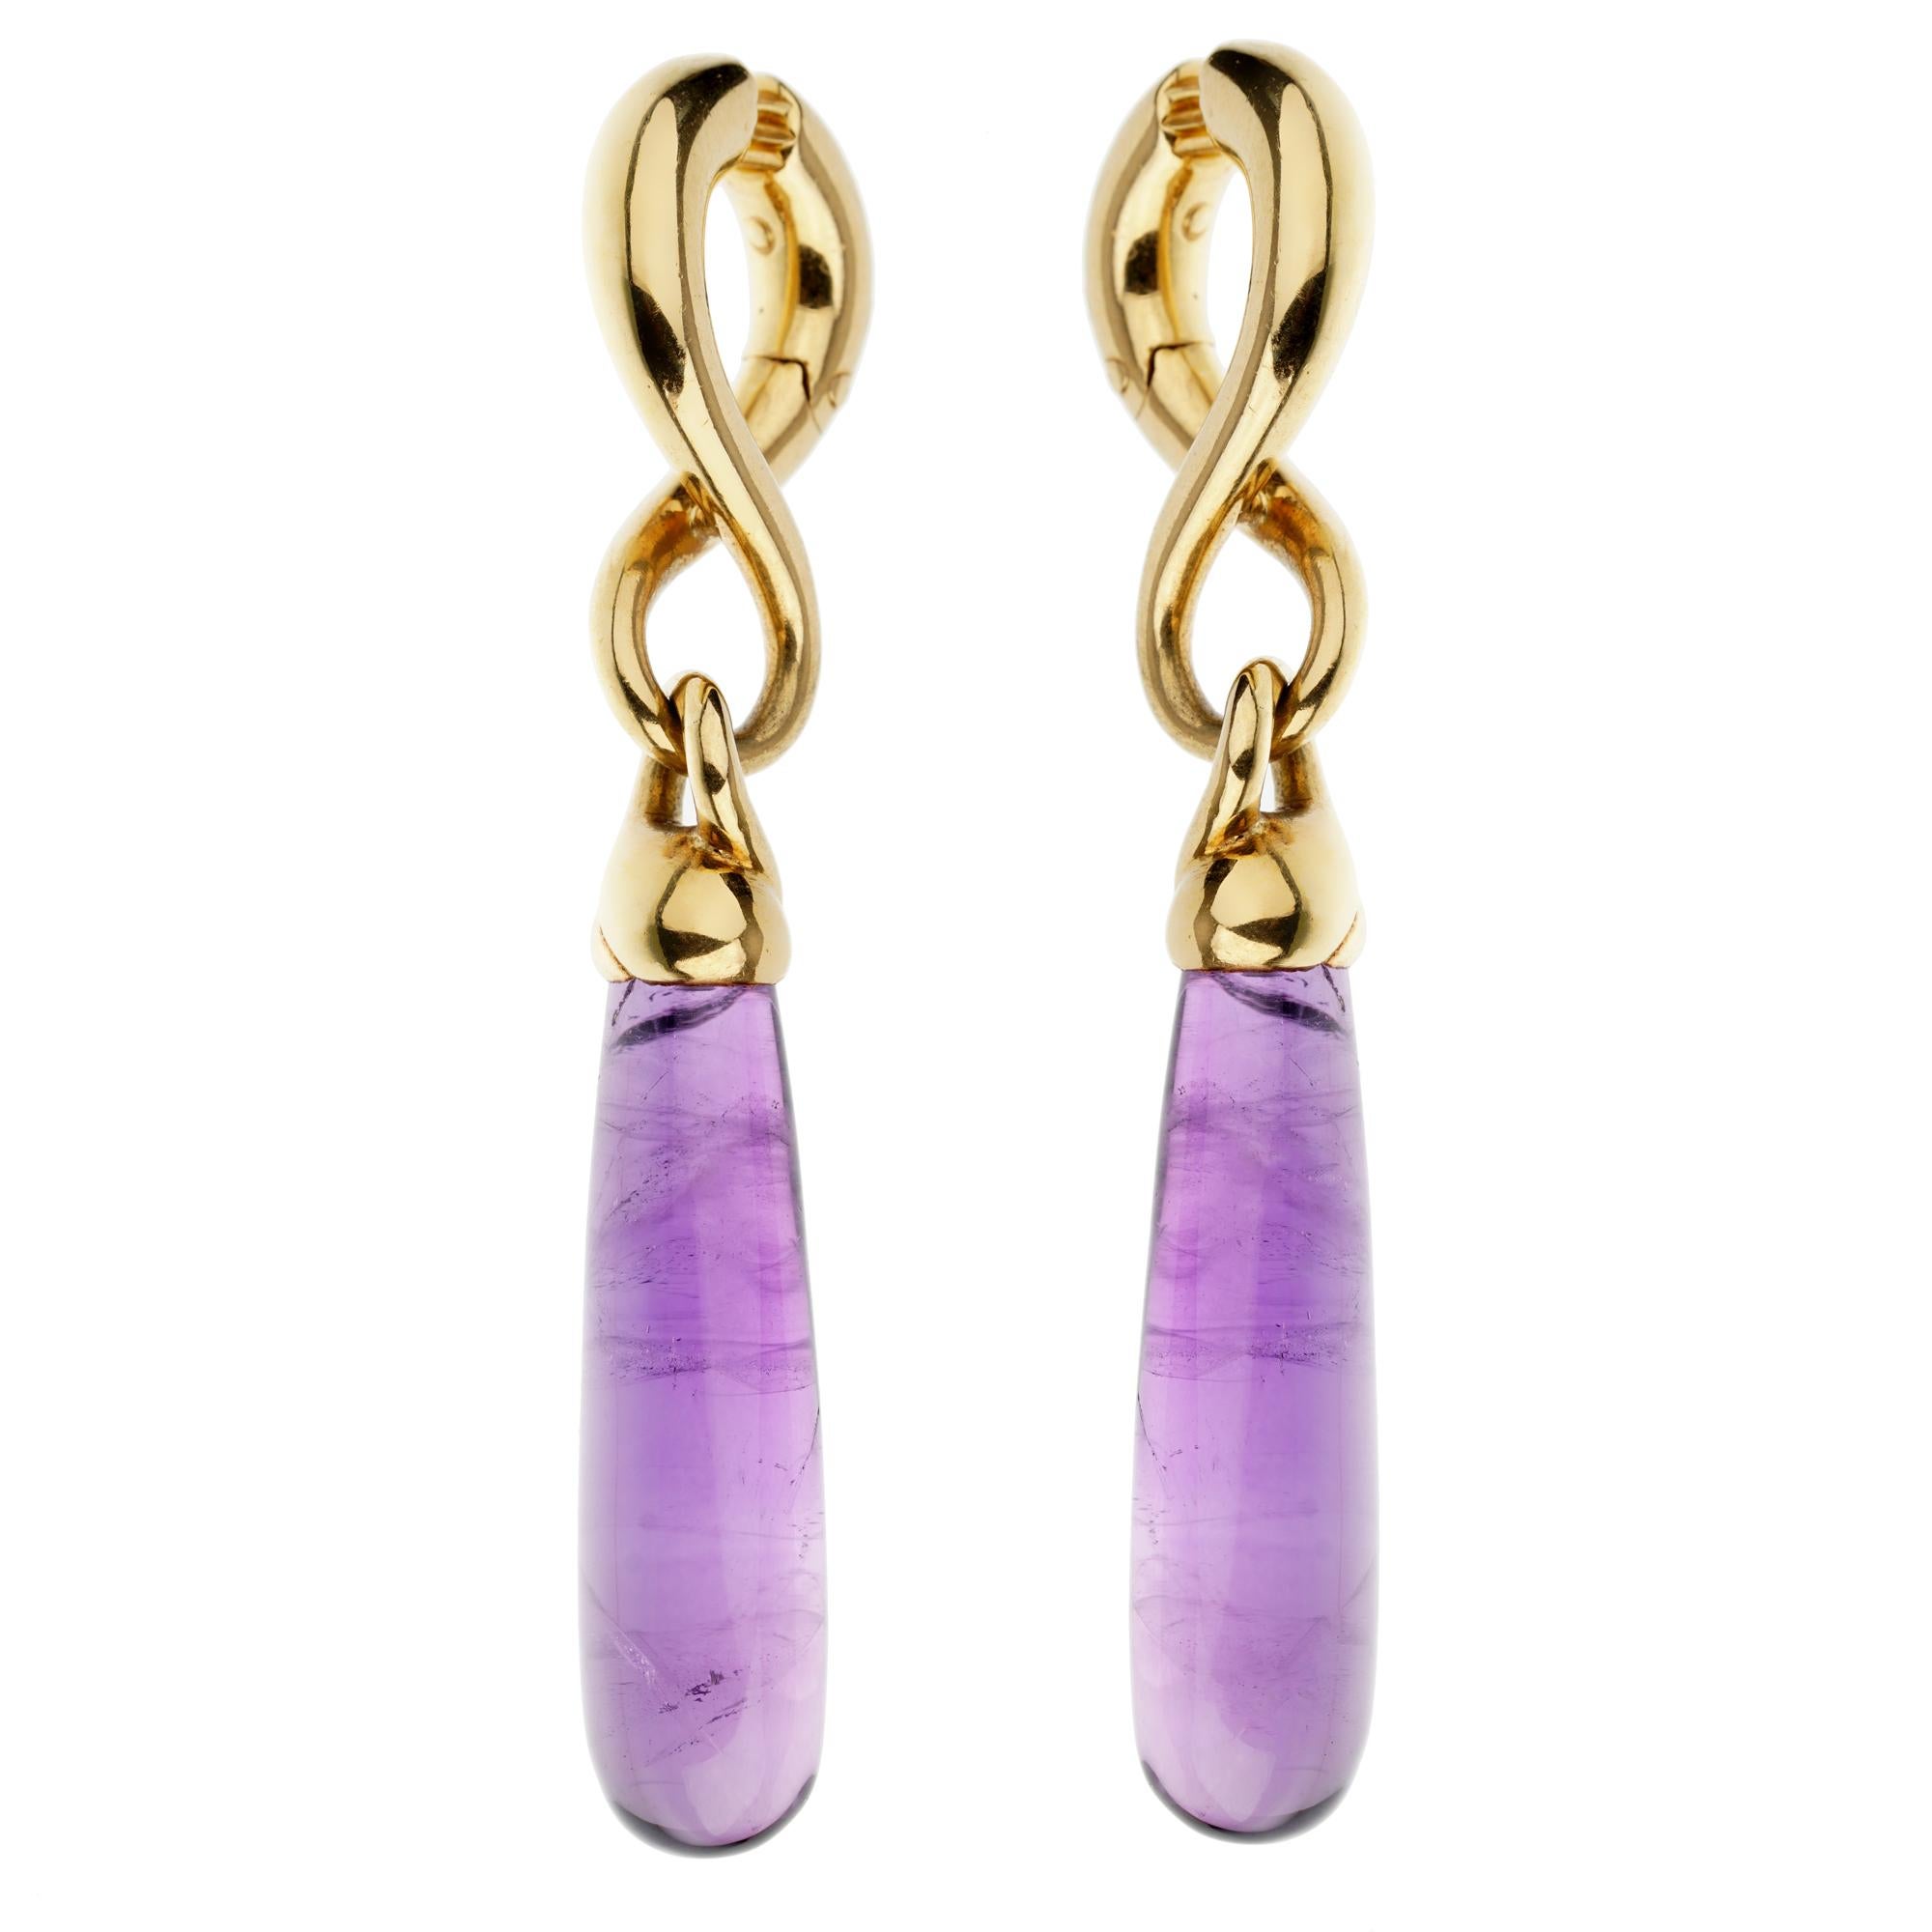 An unmistakable pair of Pomellato earrings showcasing 2 large amethysts suspended by an 18k yellow gold figure 8 motif. The earrings measure 2 1/2